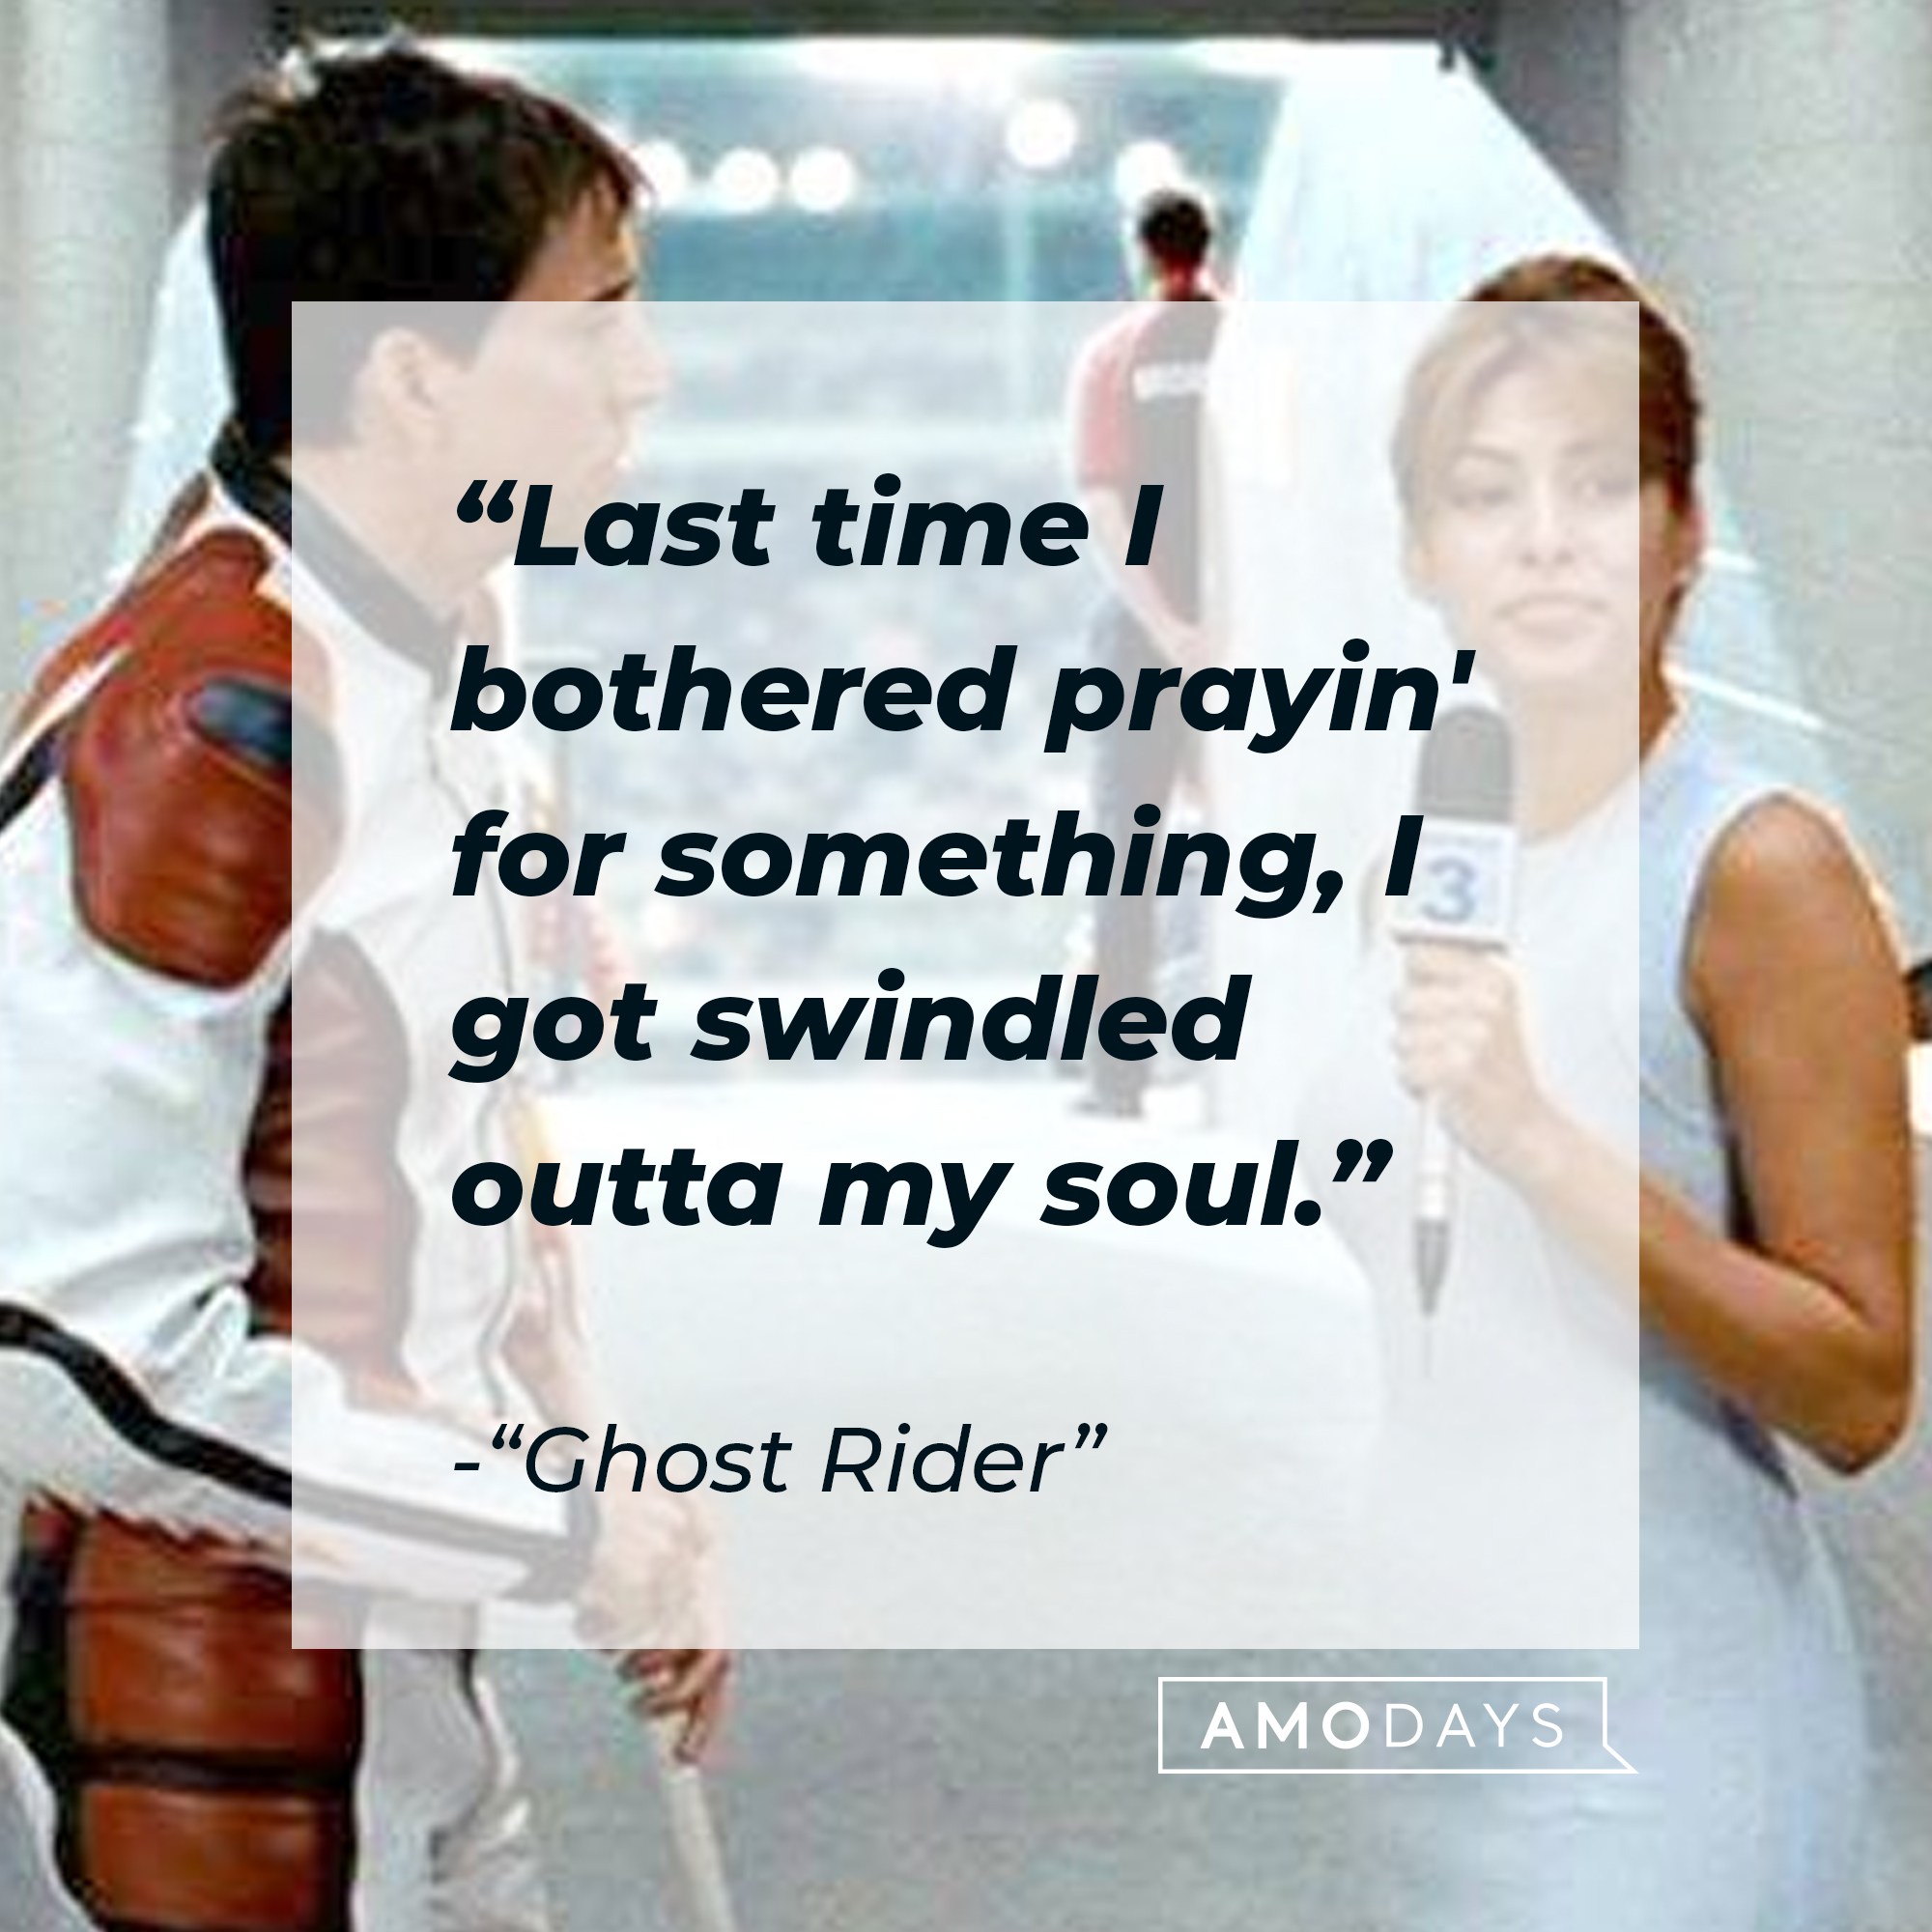 "Ghost Rider" quote: "Last time I bothered prayin' for something, I got swindled outta my soul." | Source: facebook.com/ghostridermovie